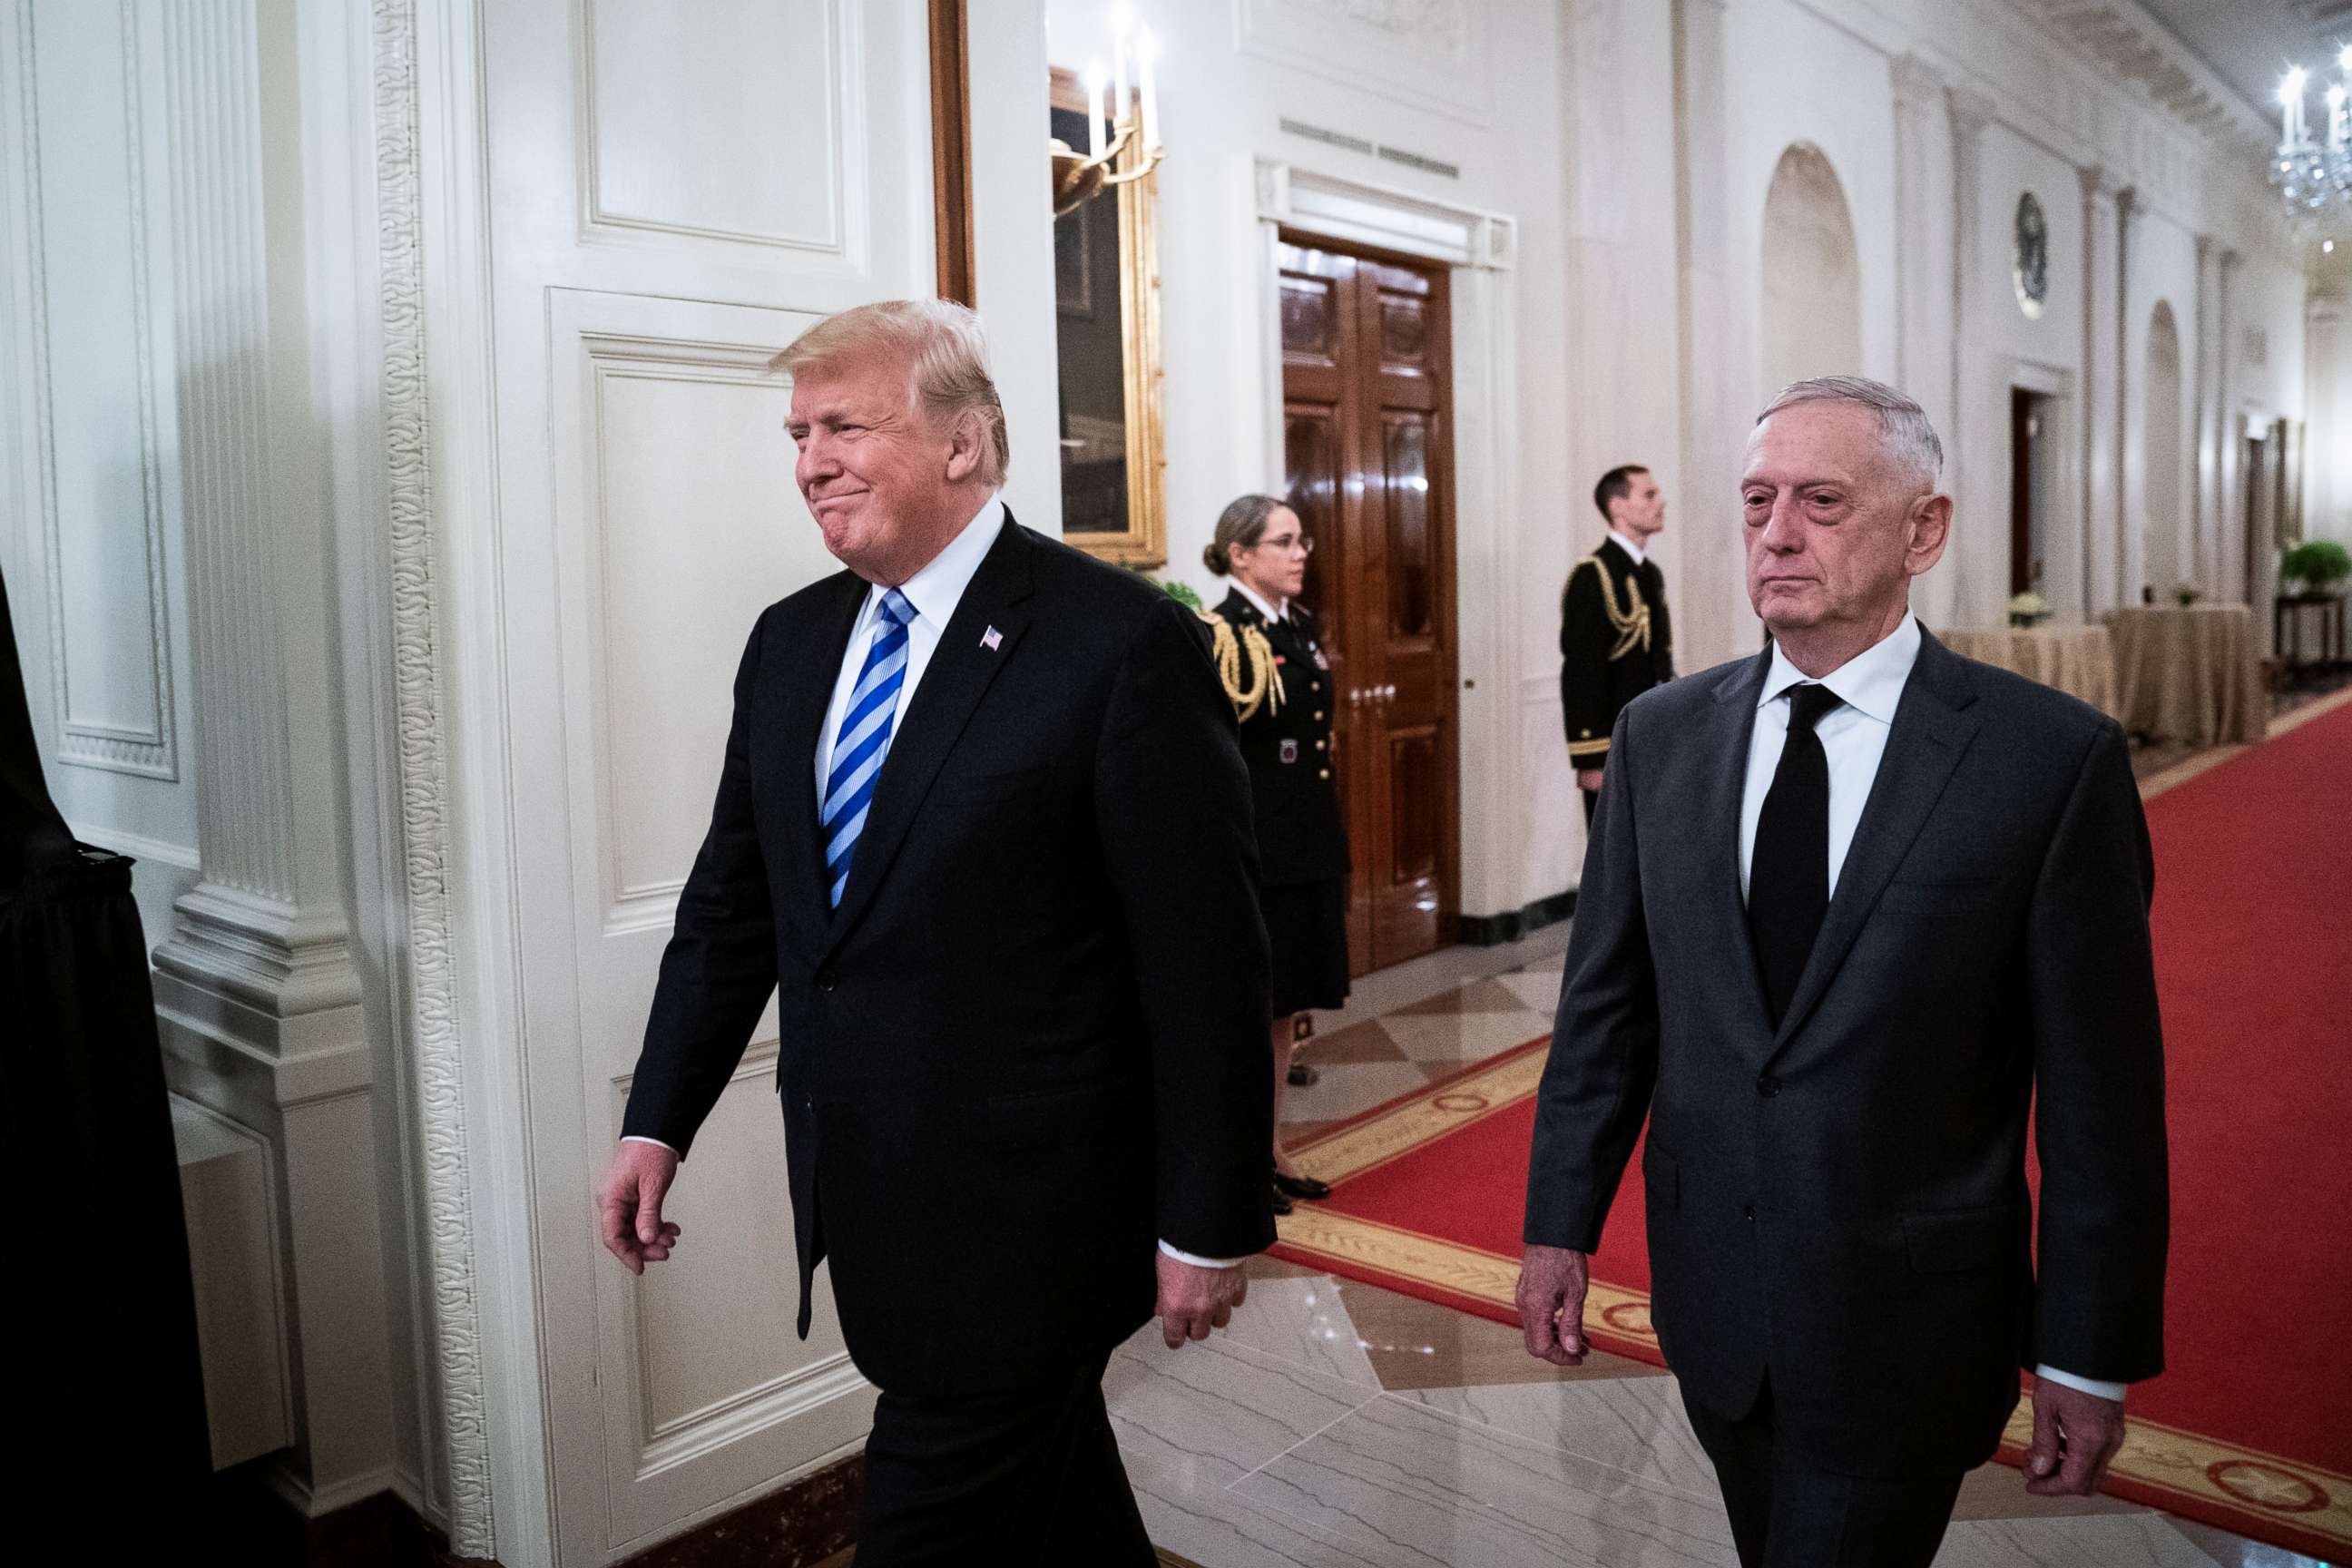 PHOTO: Donald Trump and James Mattis arrive to speak in the East Room of the White House on Thursday, Oct. 25, 2018 in Washington, DC.